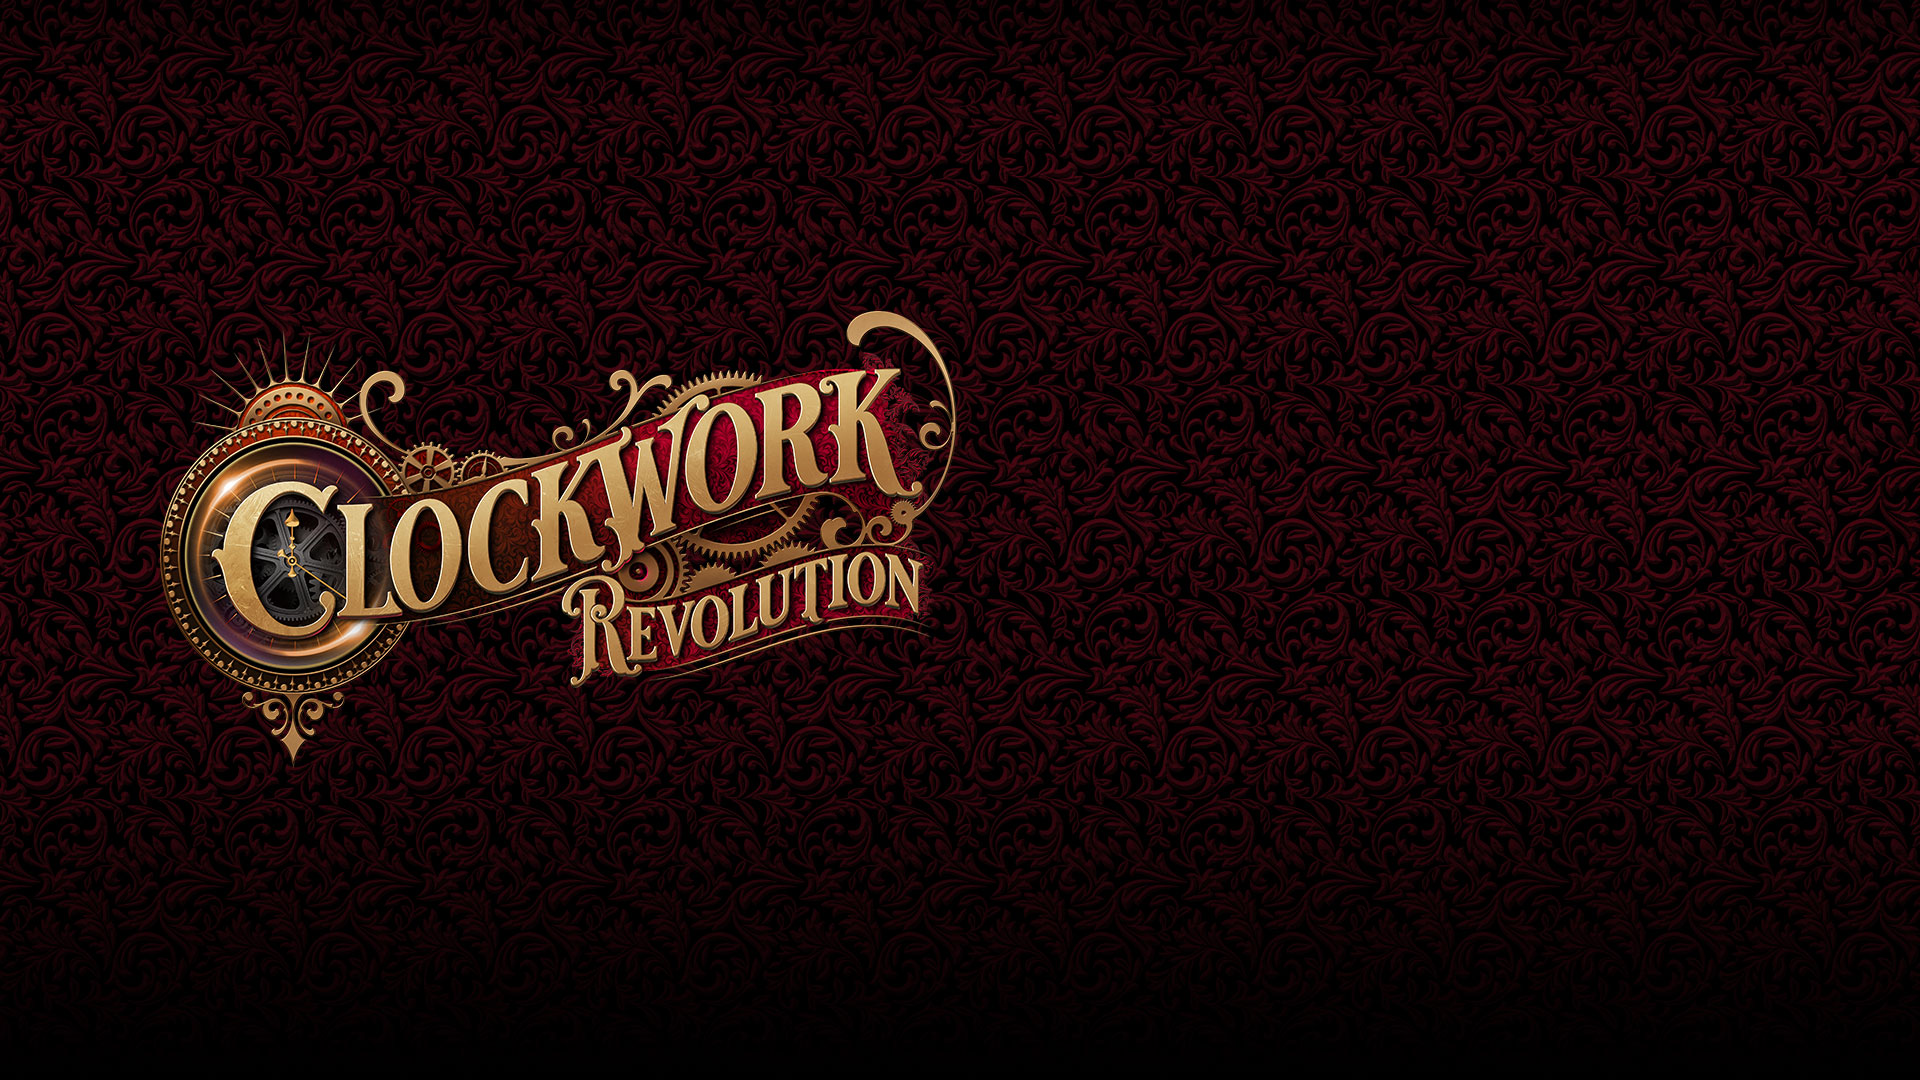 Clockwork Revolution logo written in gold and red with gear imagery.